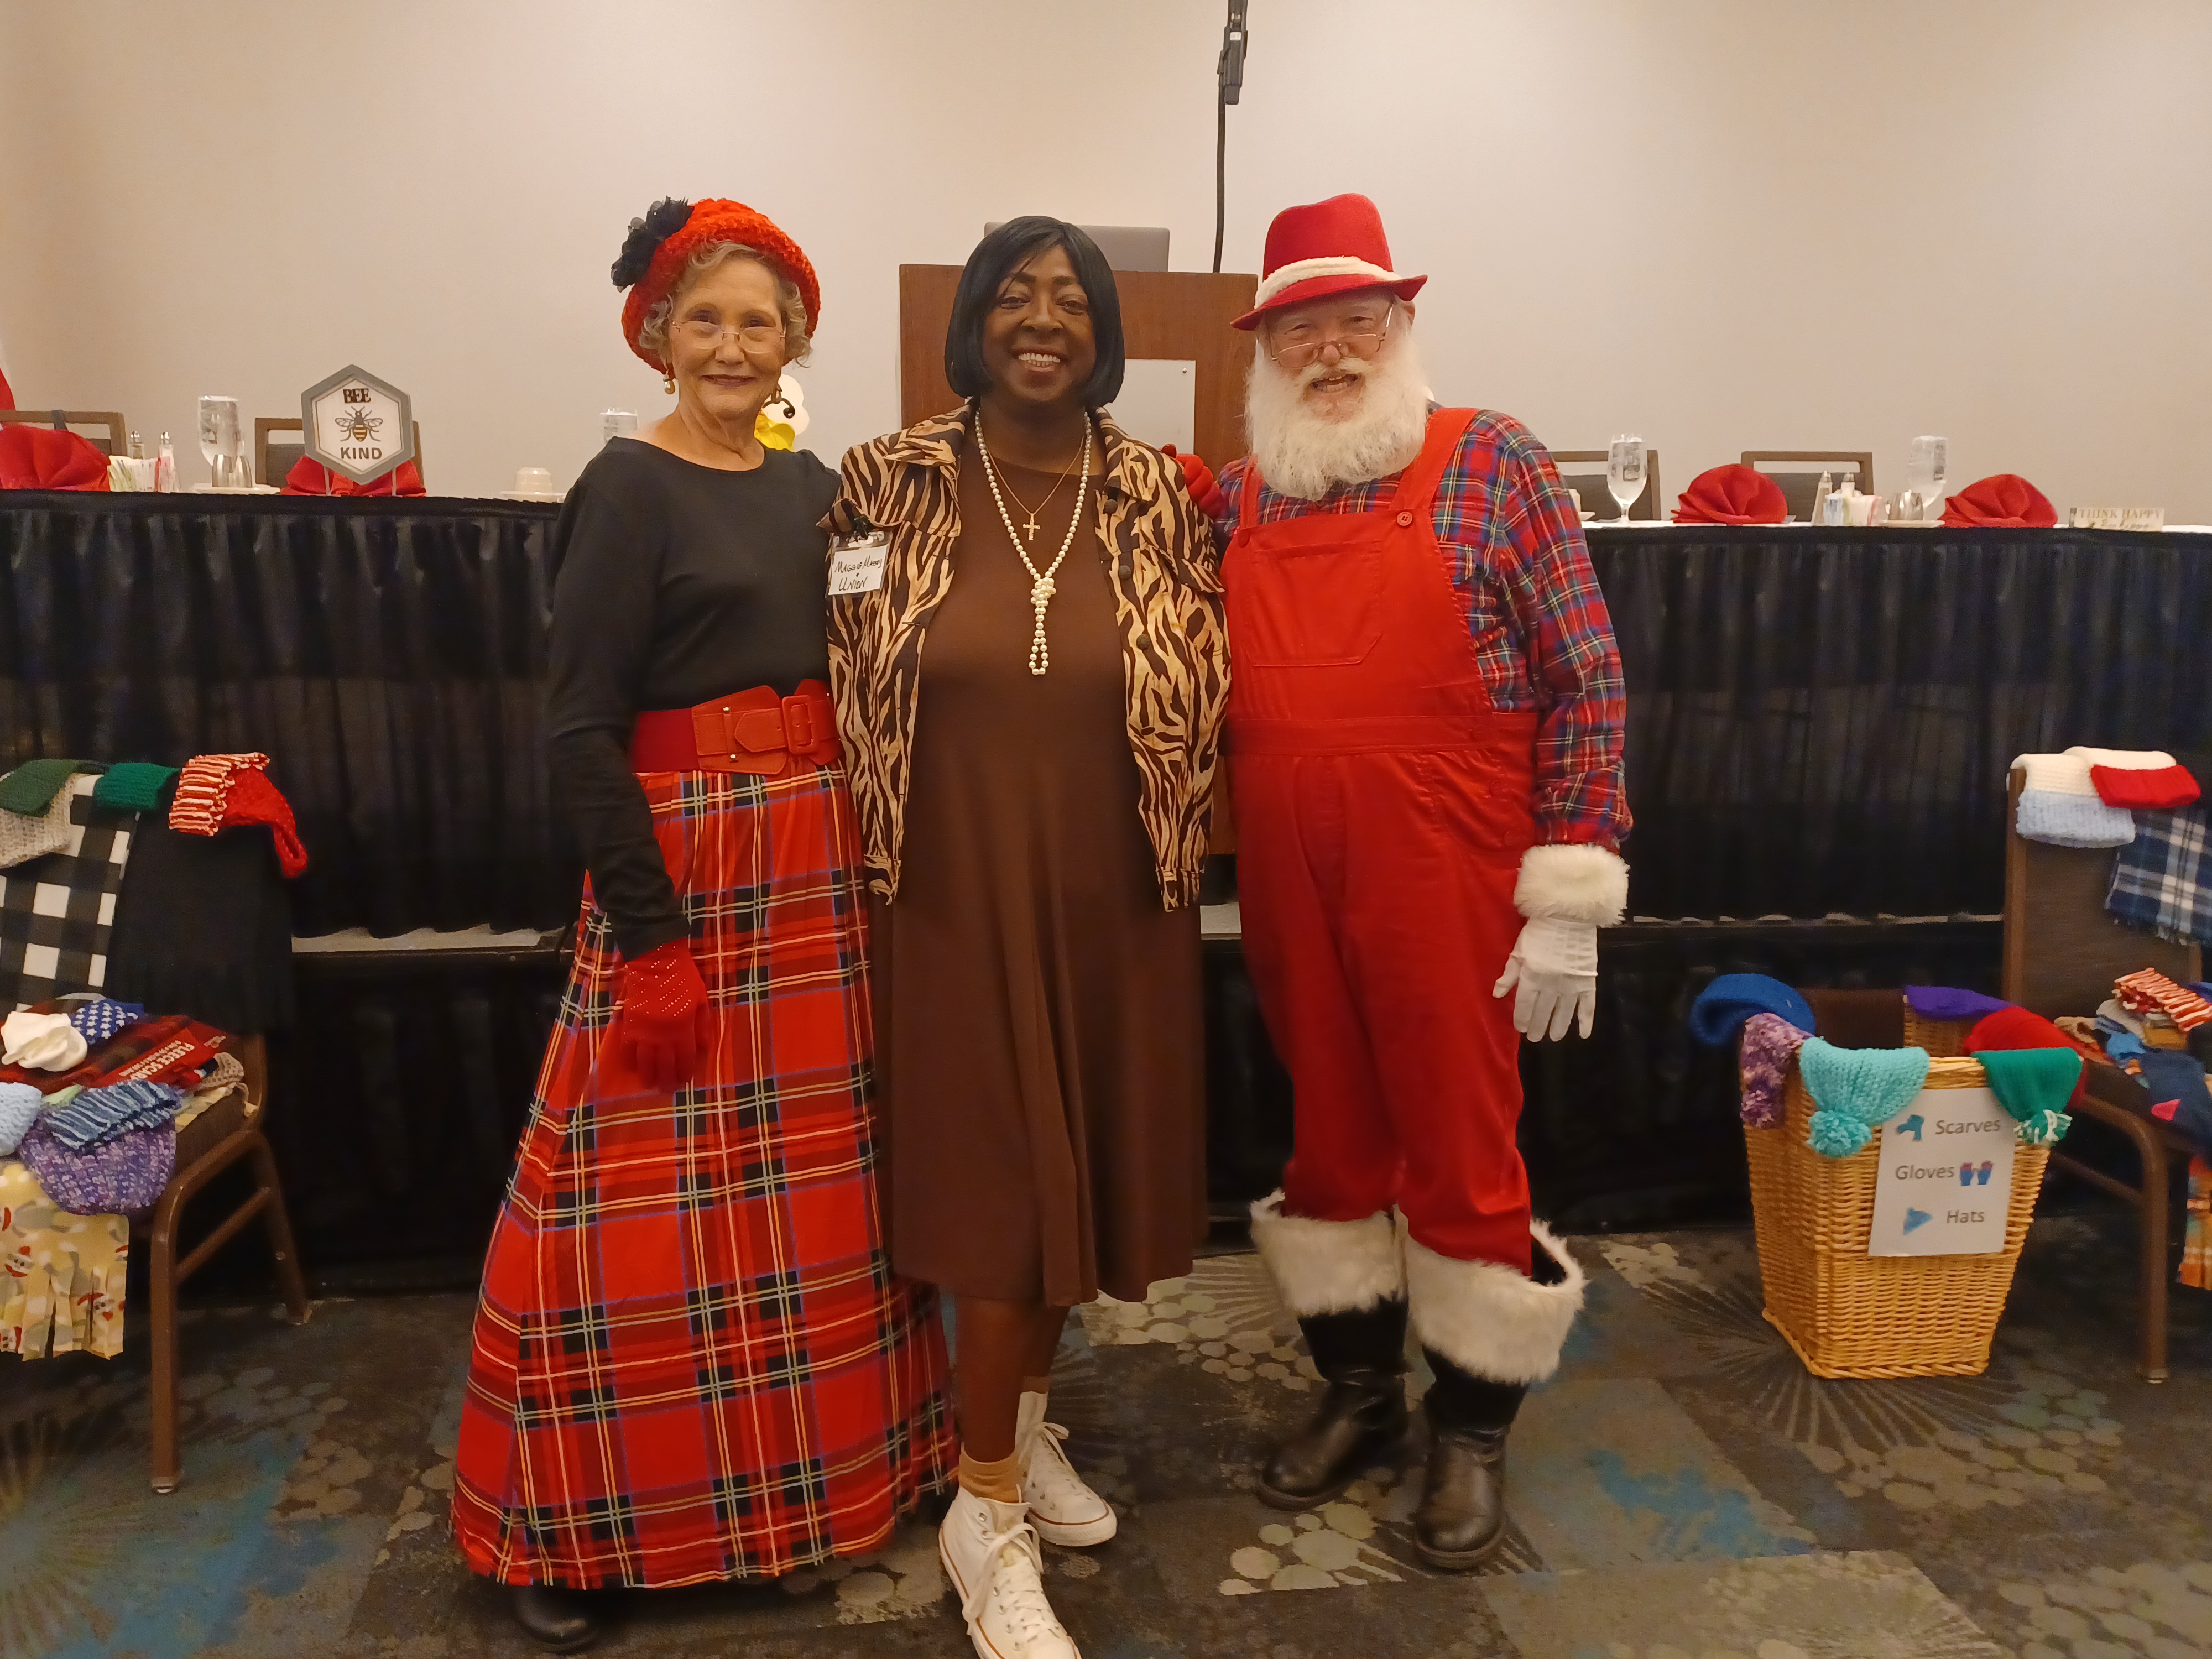 Volunteer takes picture with Santa and Mrs. Claus